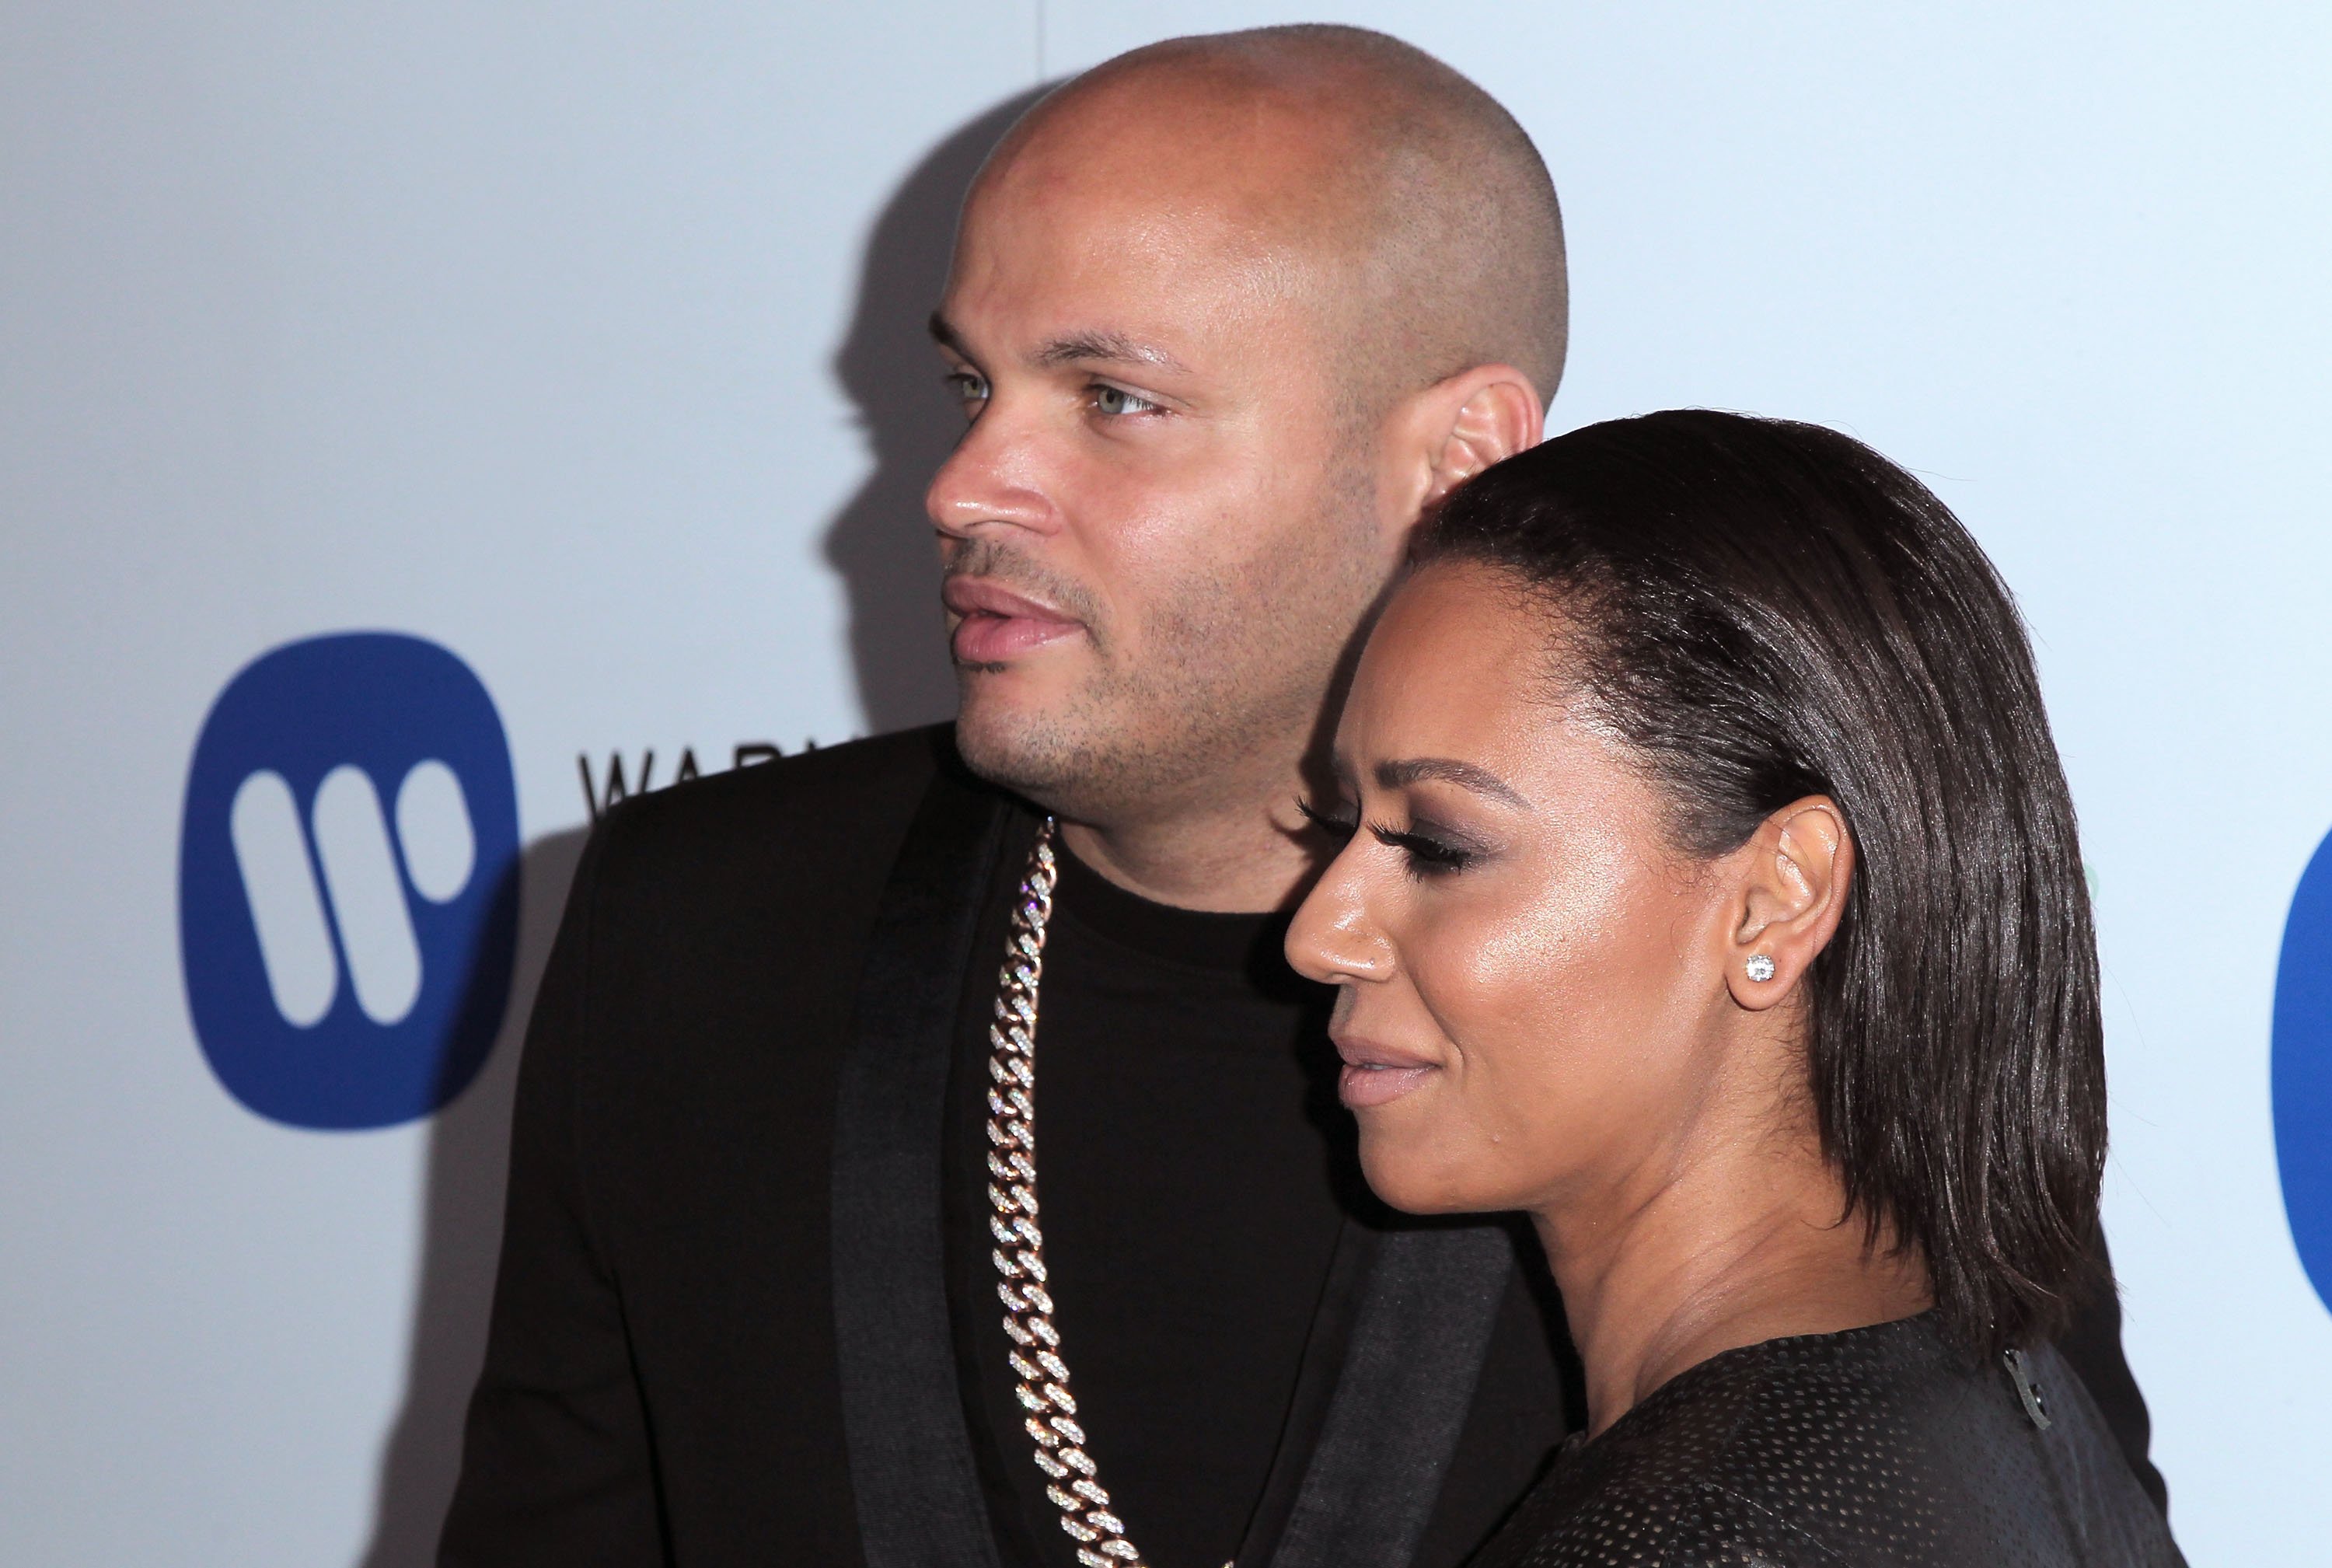 Mel B and her ex-husband Stephen Belafonte attending a Grammy celebration in February 2015. | Photo: Getty Images